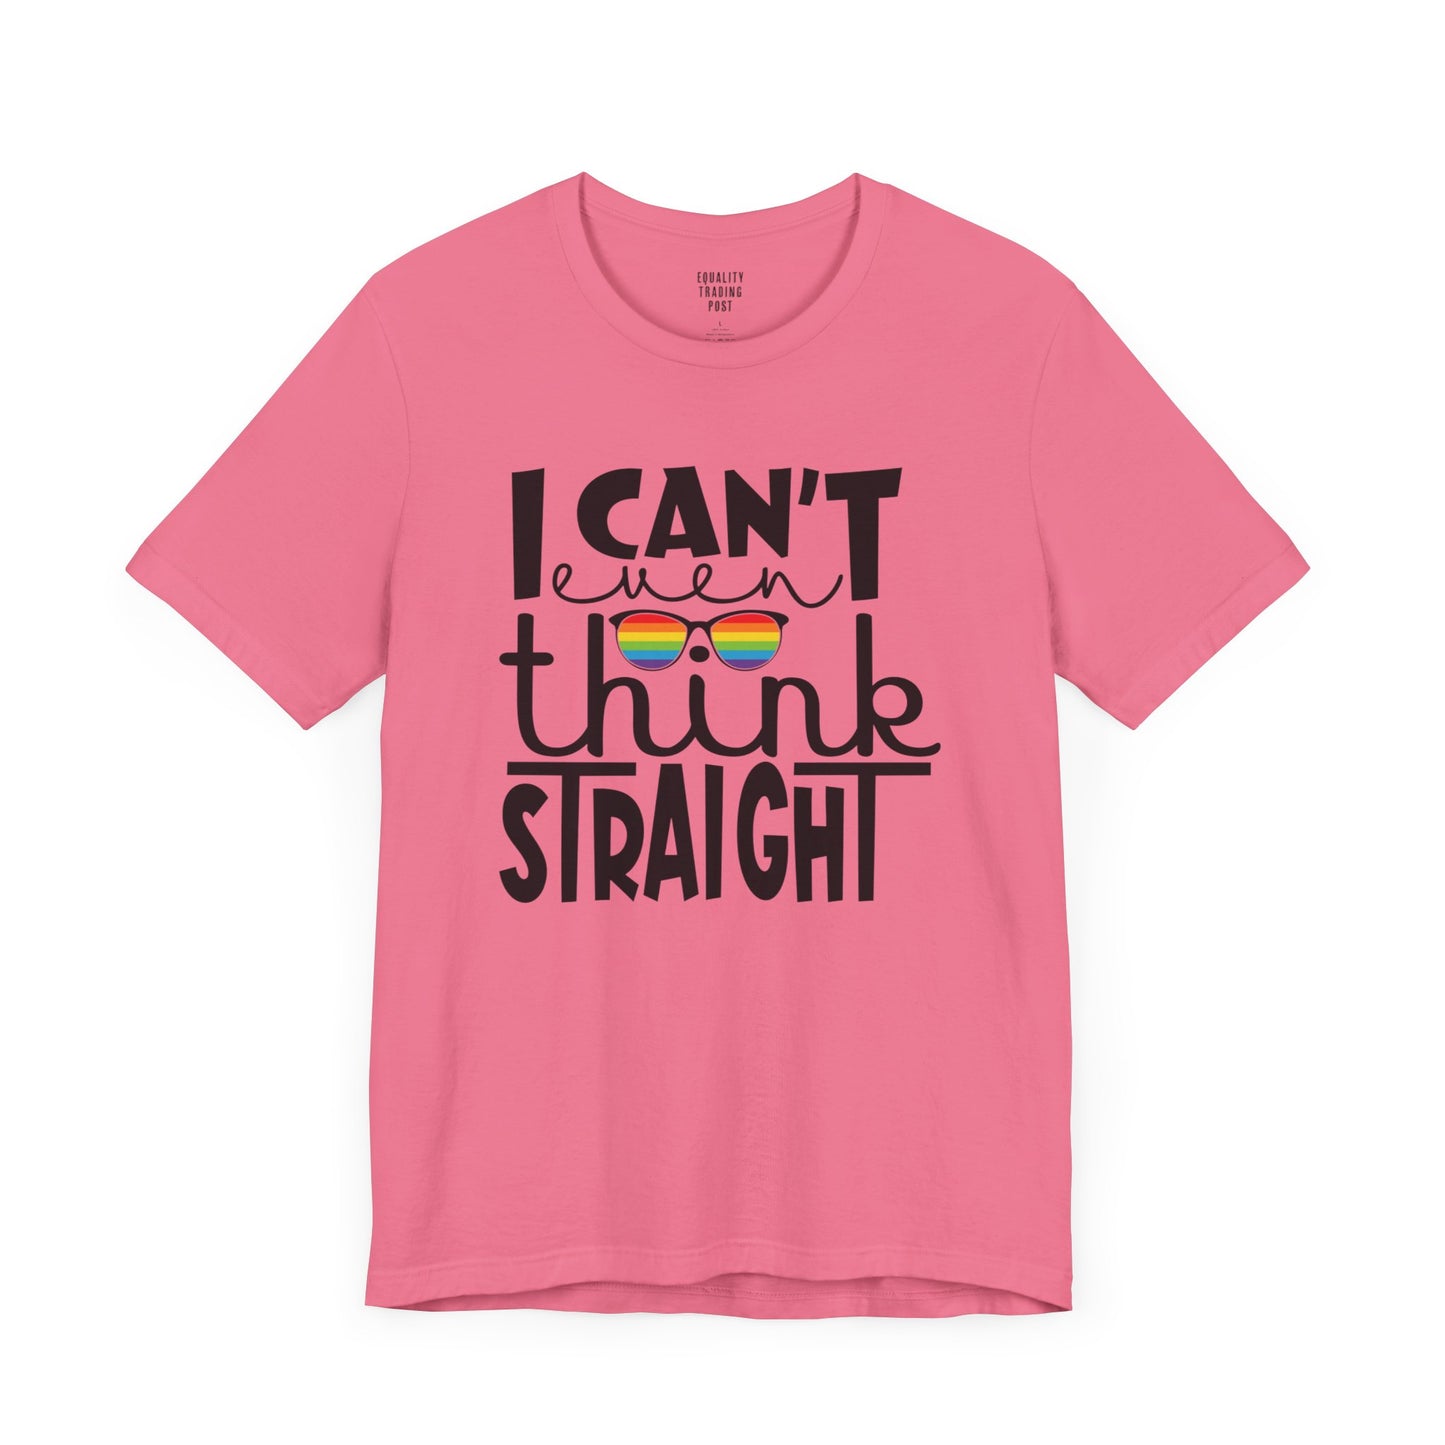 I Can't Even Think Straight Tee